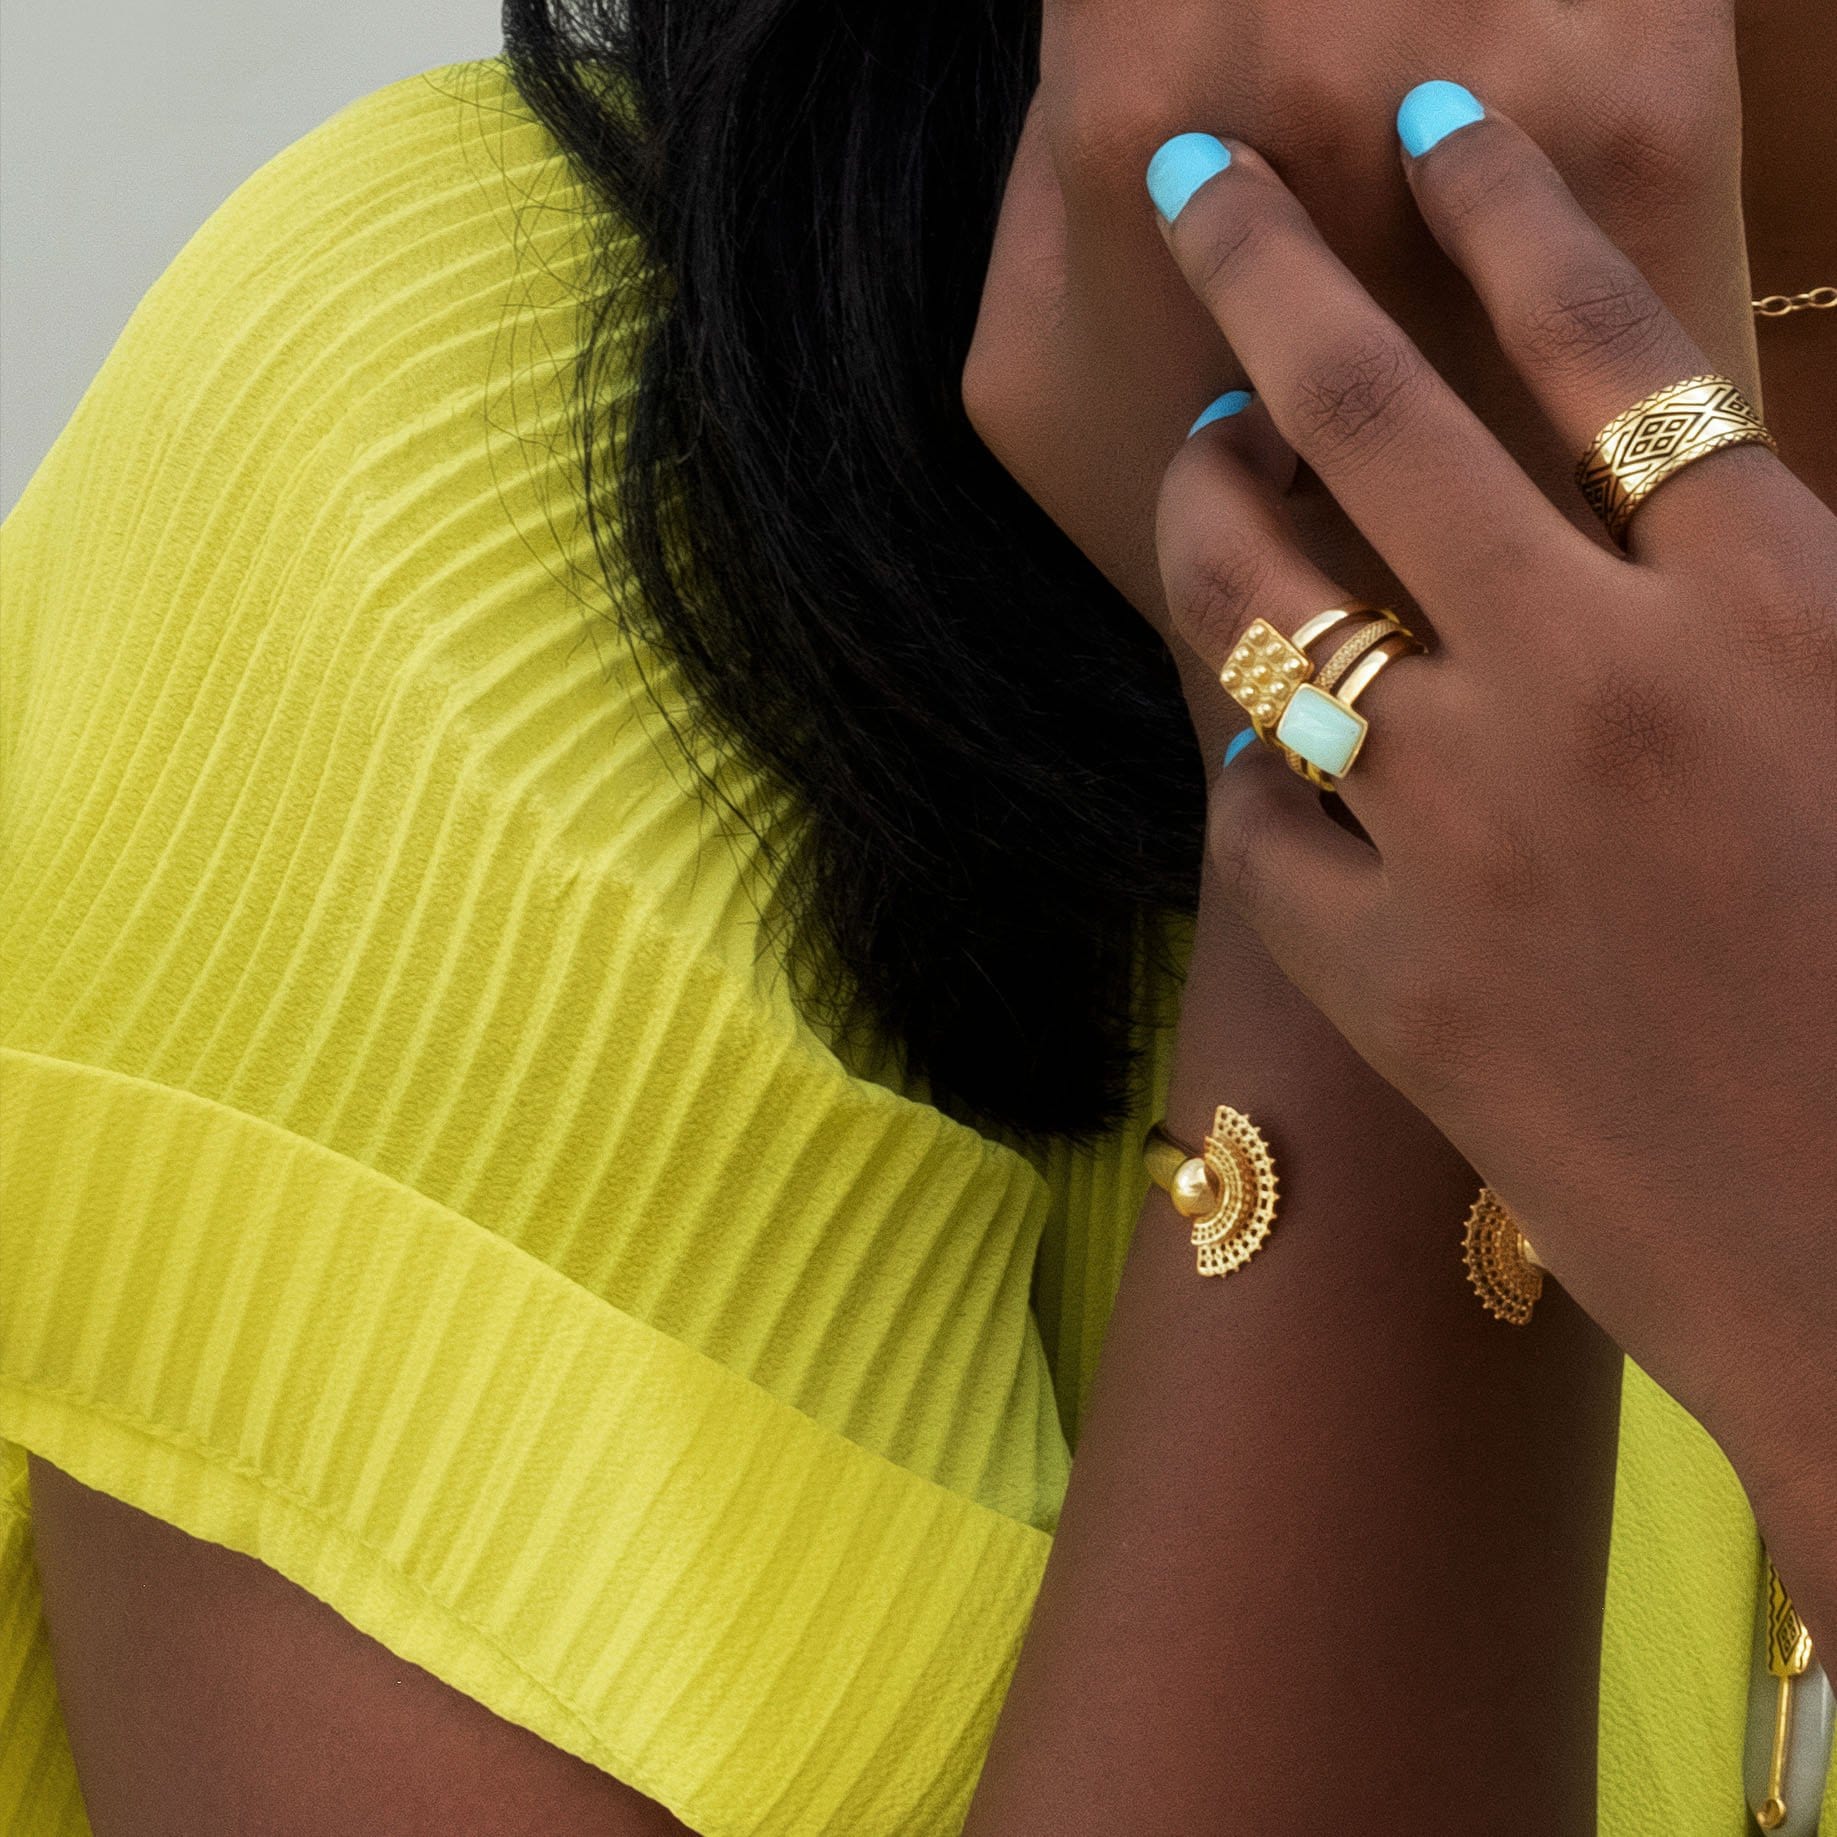 Yenaé Jewelry Collection 14 carat gold plated semi-precious chrysoprase gemstone Teslom Stackable Ring worn by a model.